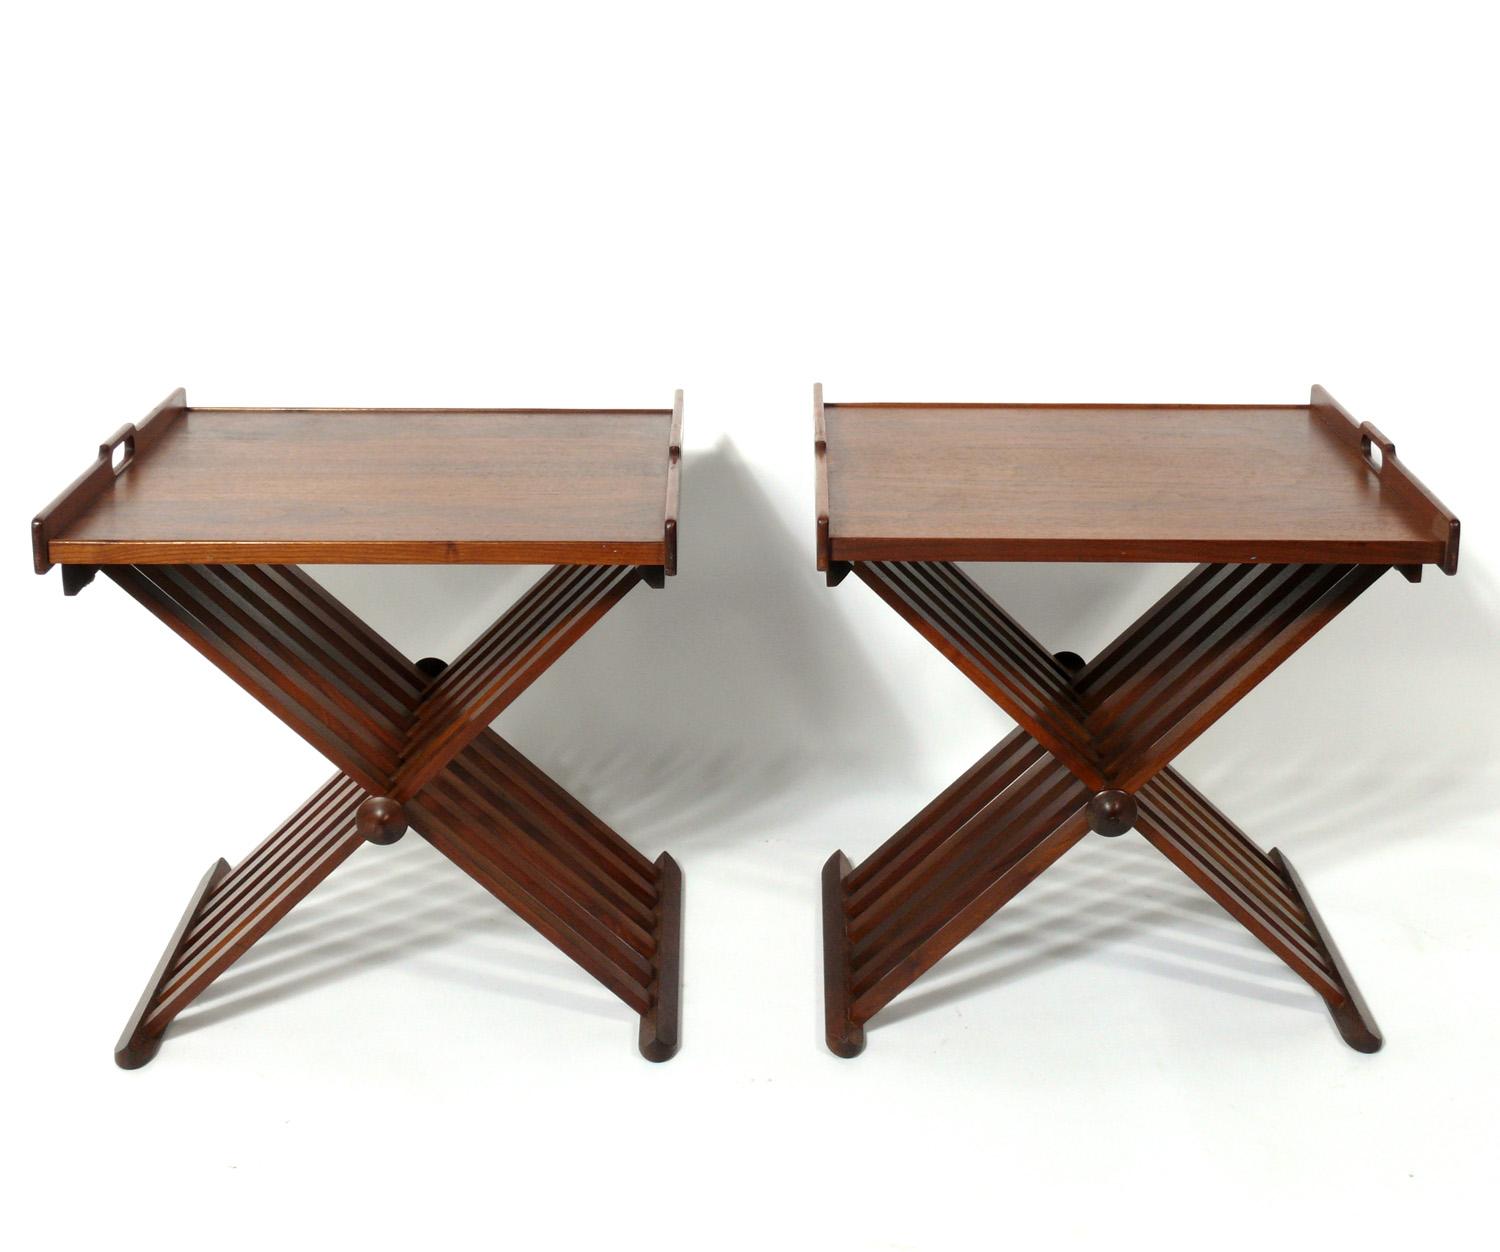 Pair of modernist walnut campaign tables, designed by Kipp Stewart and Stewart MacDougall for Drexel, American, circa 1950s. Beautiful graining to the walnut throughout. They are a versatile size and can be used as side or end tables, or as